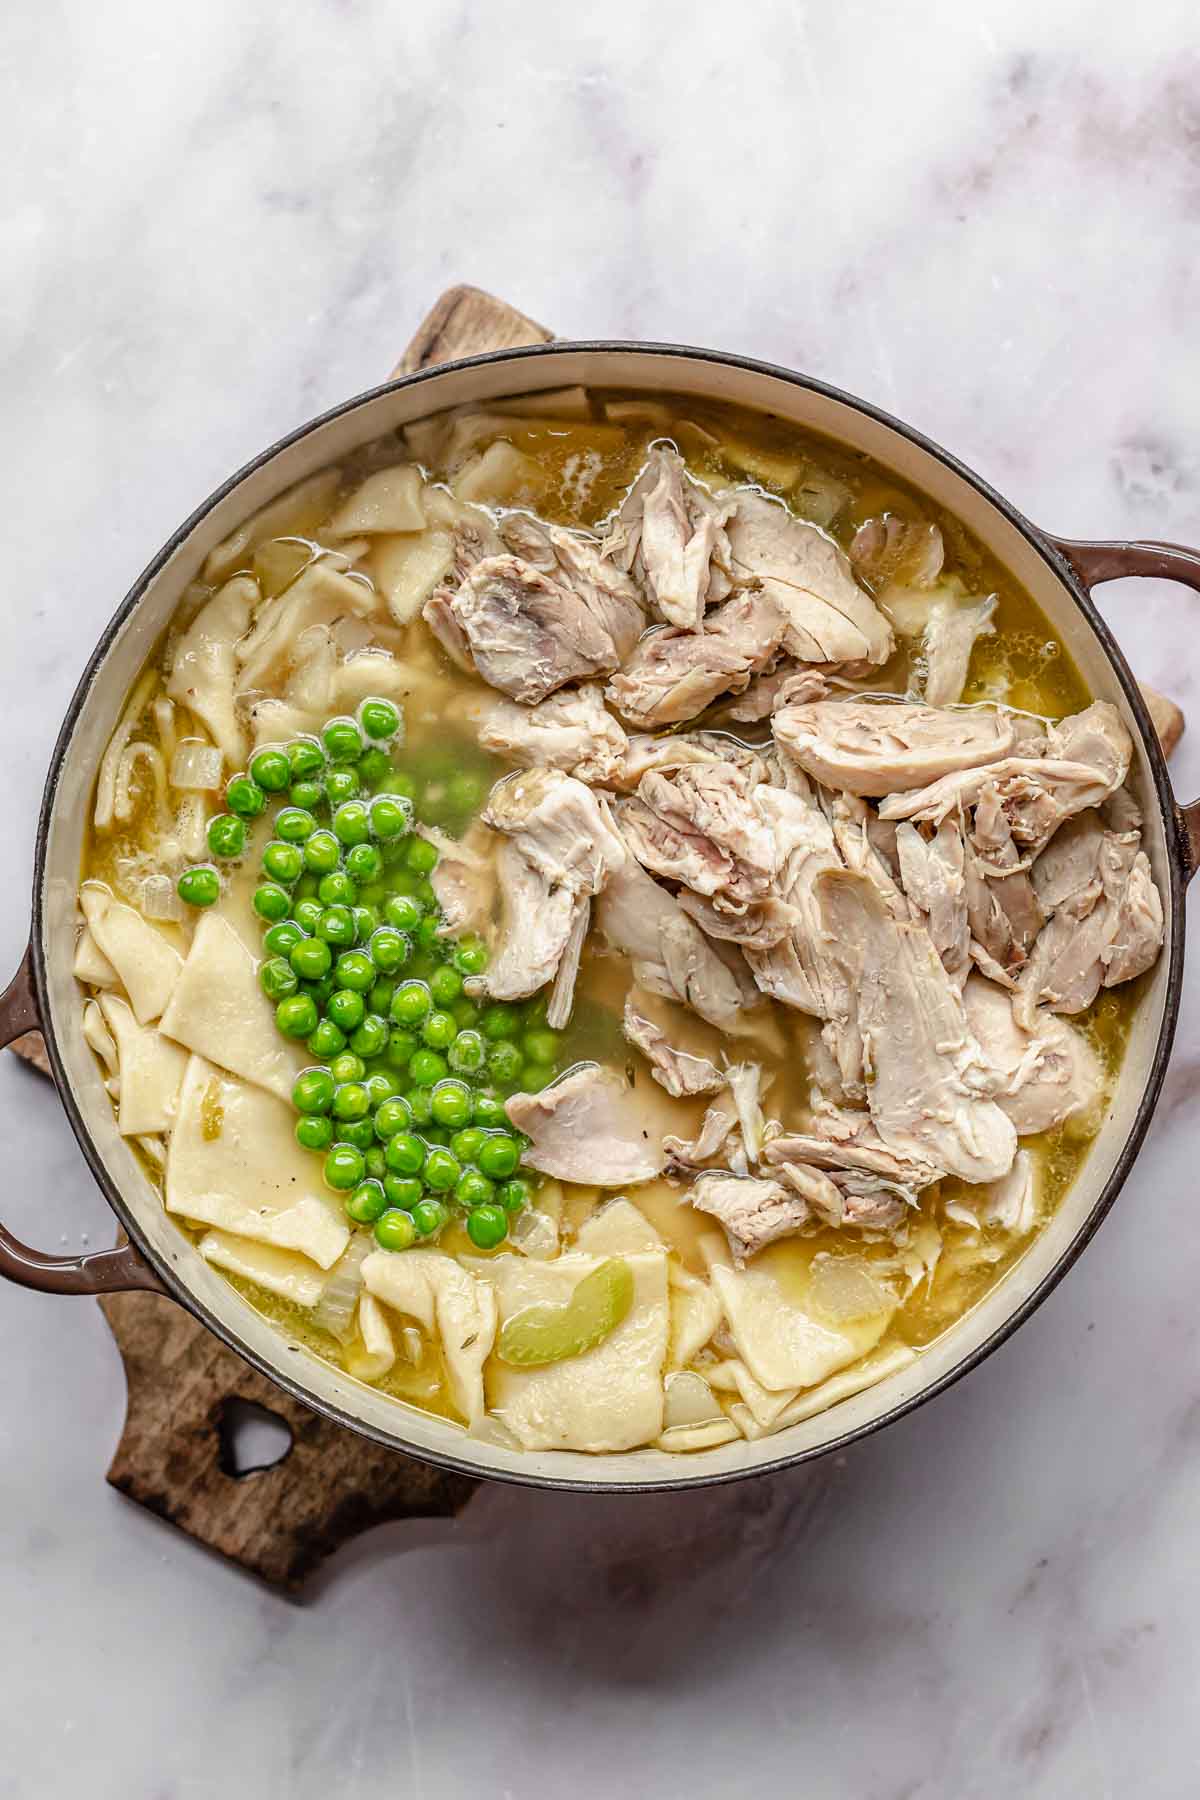 Peas and chicken on top of chicken soup and noodles.